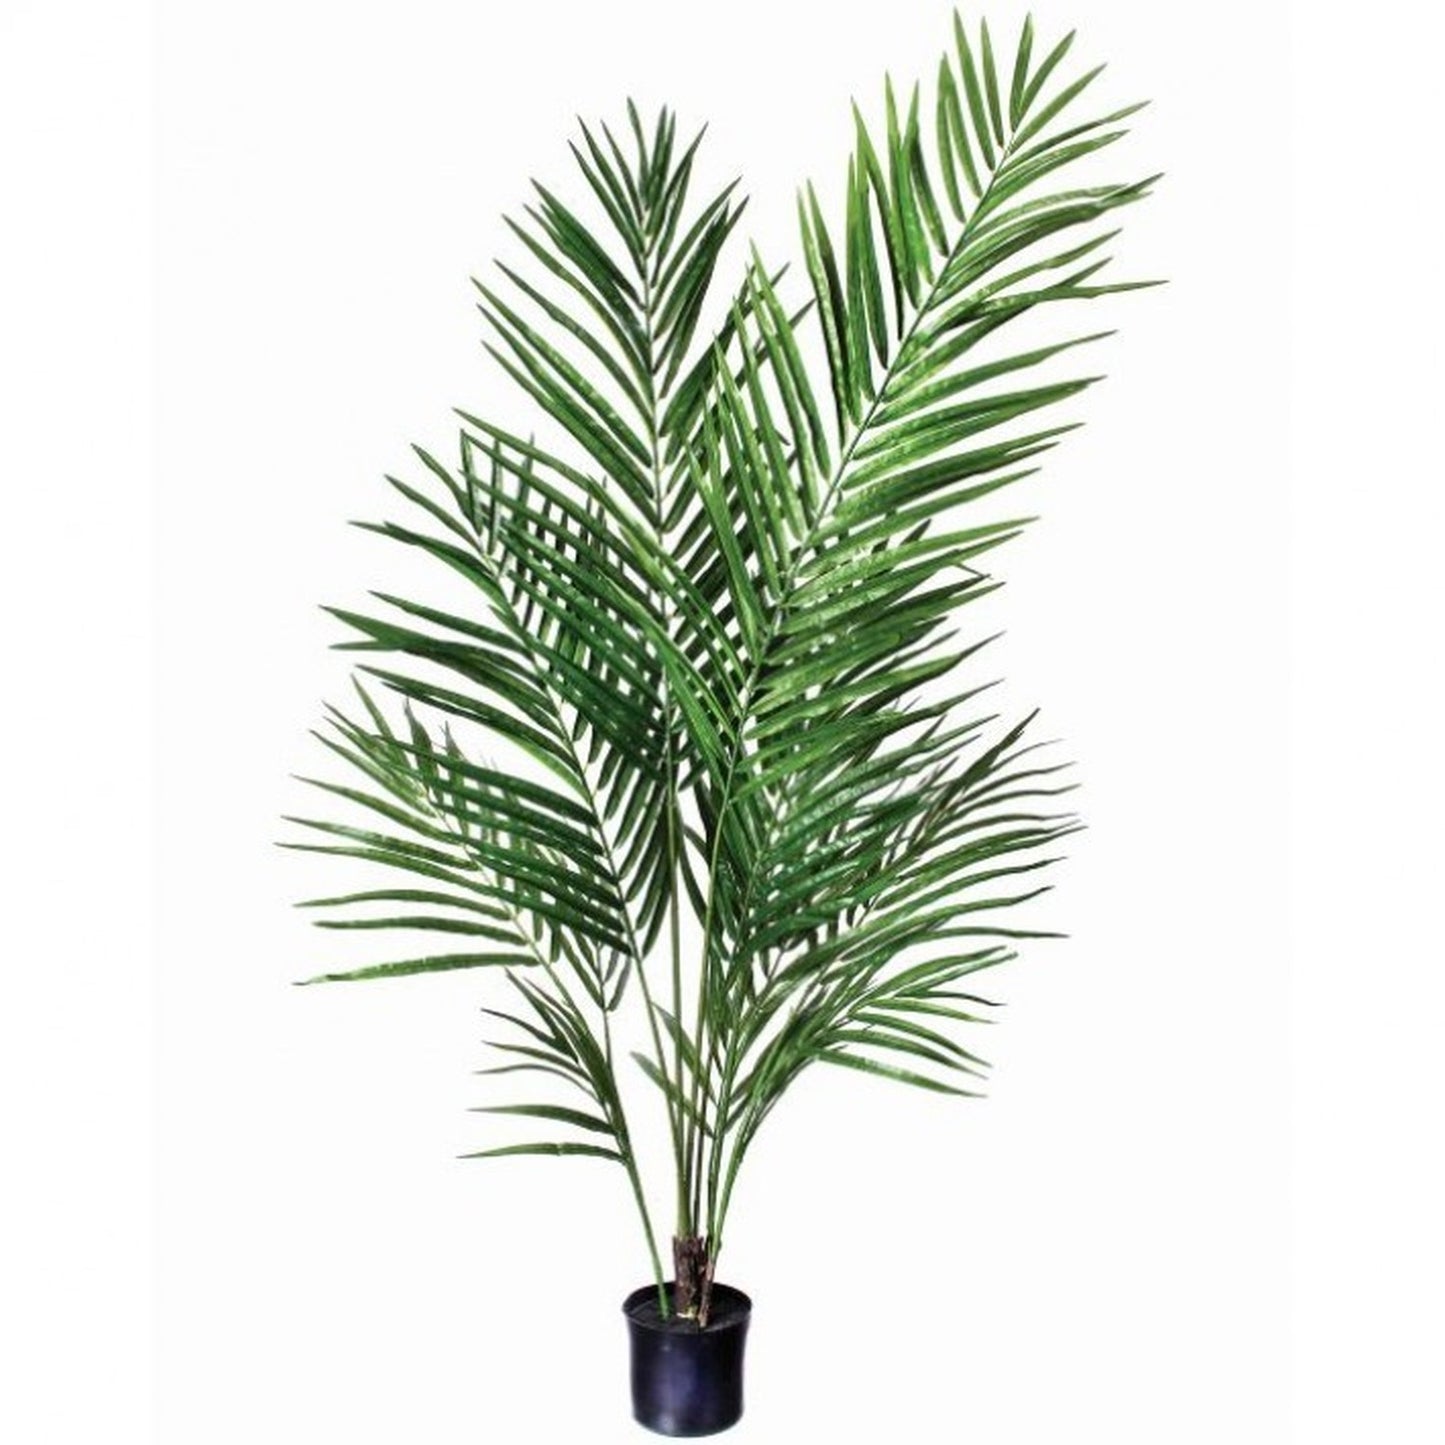 Regency International 4' Potted Areca Palm with 261 Leaves